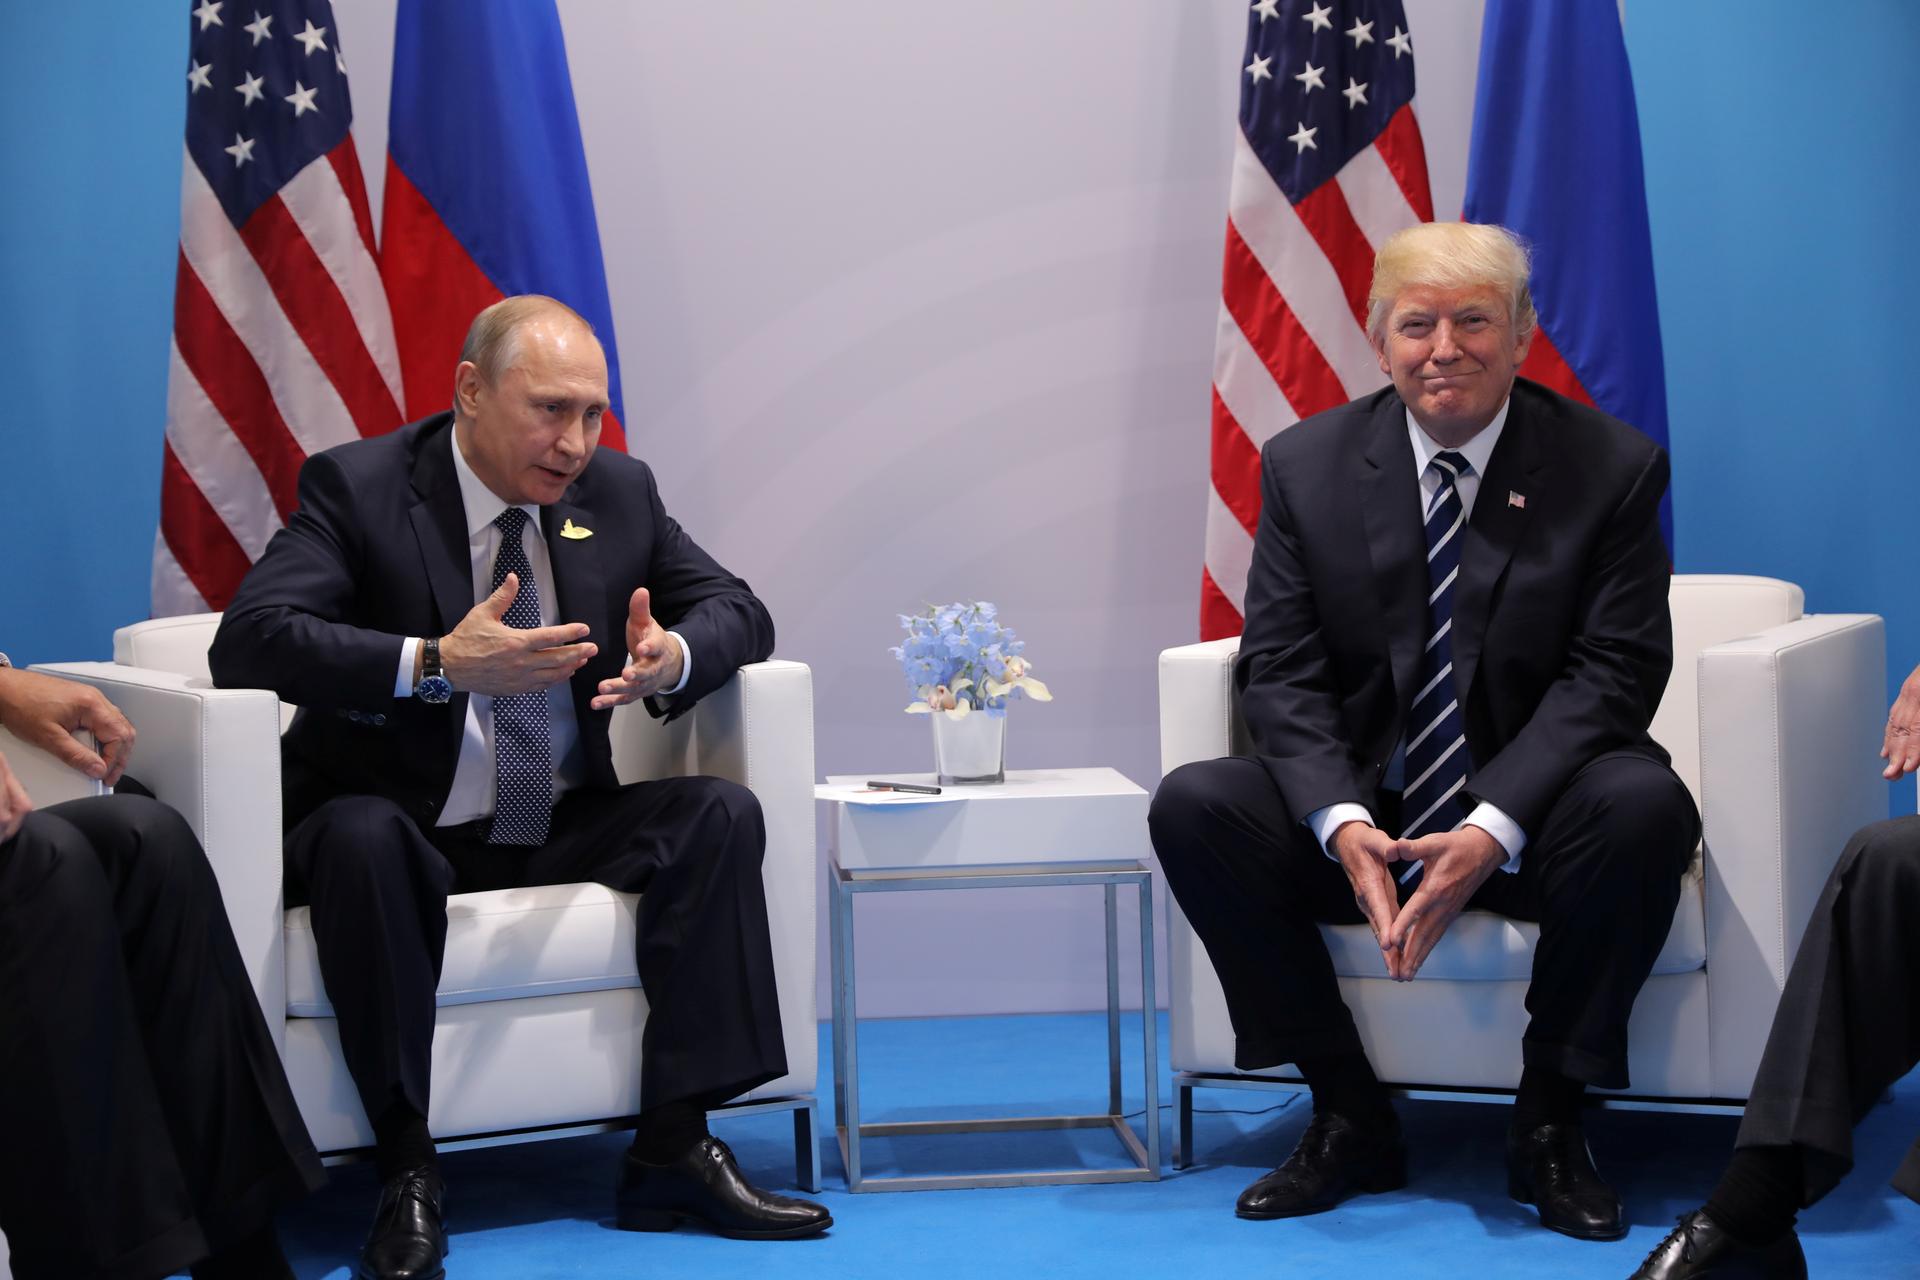 Russia's President Vladimir Putin talks to President Donald Trump during their bilateral meeting in Germany.